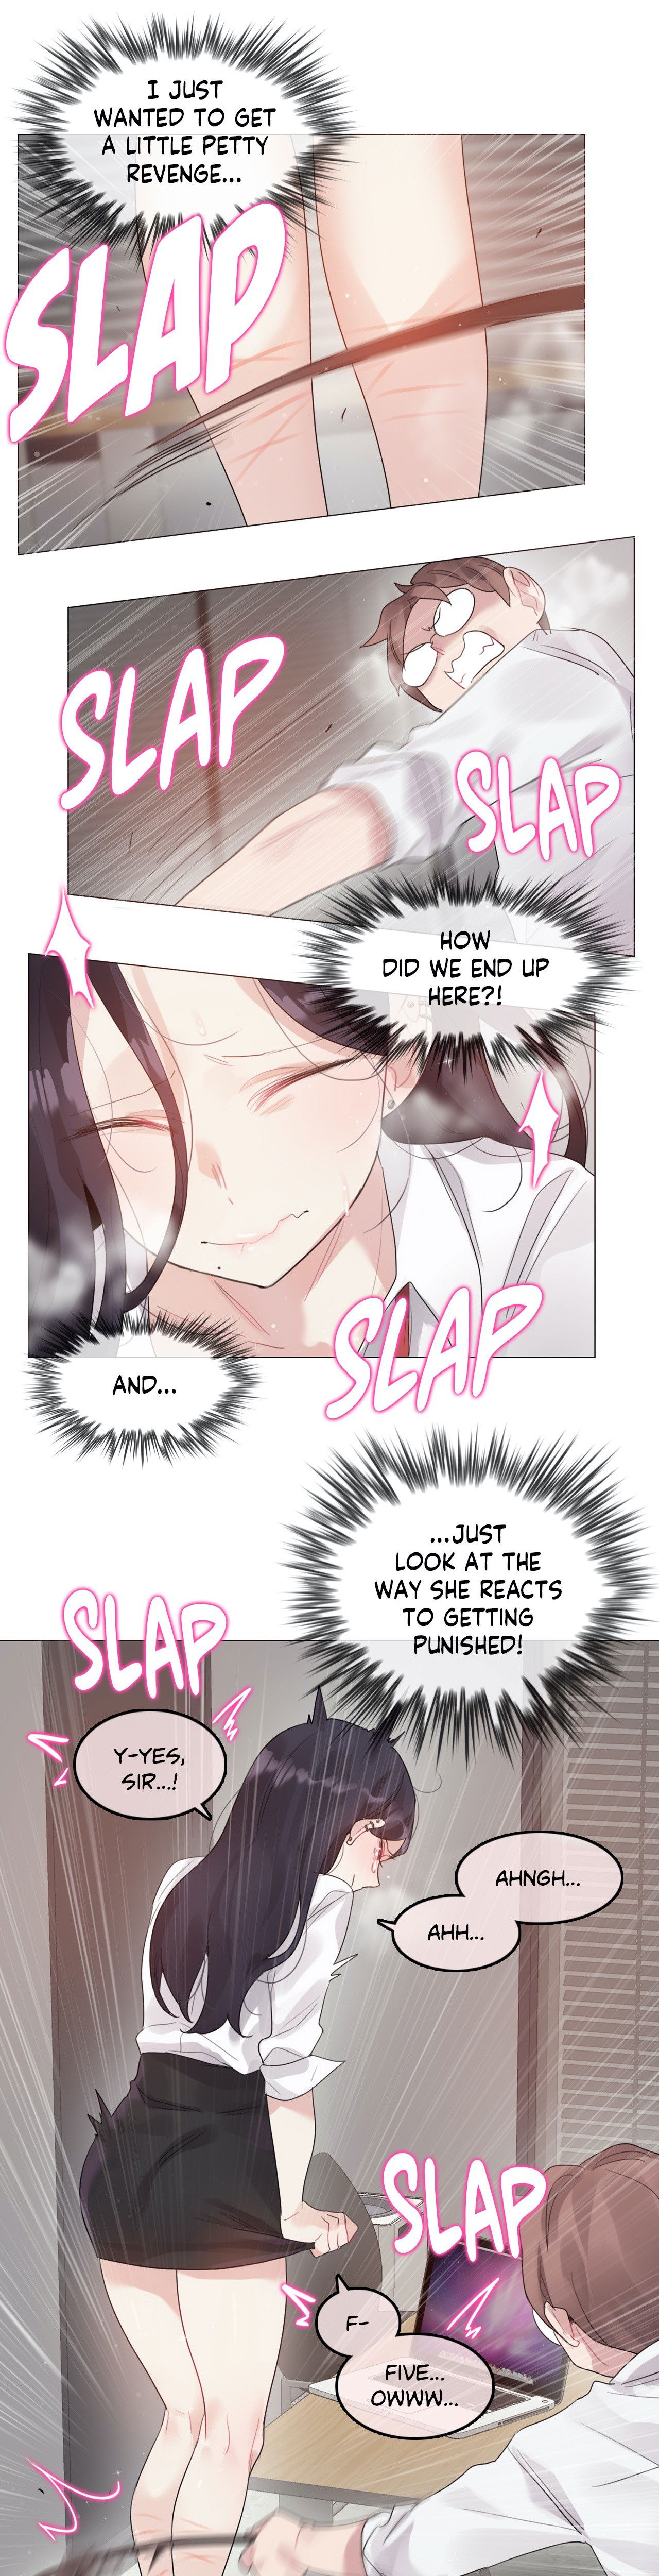 a-perverts-daily-life-chap-127-6